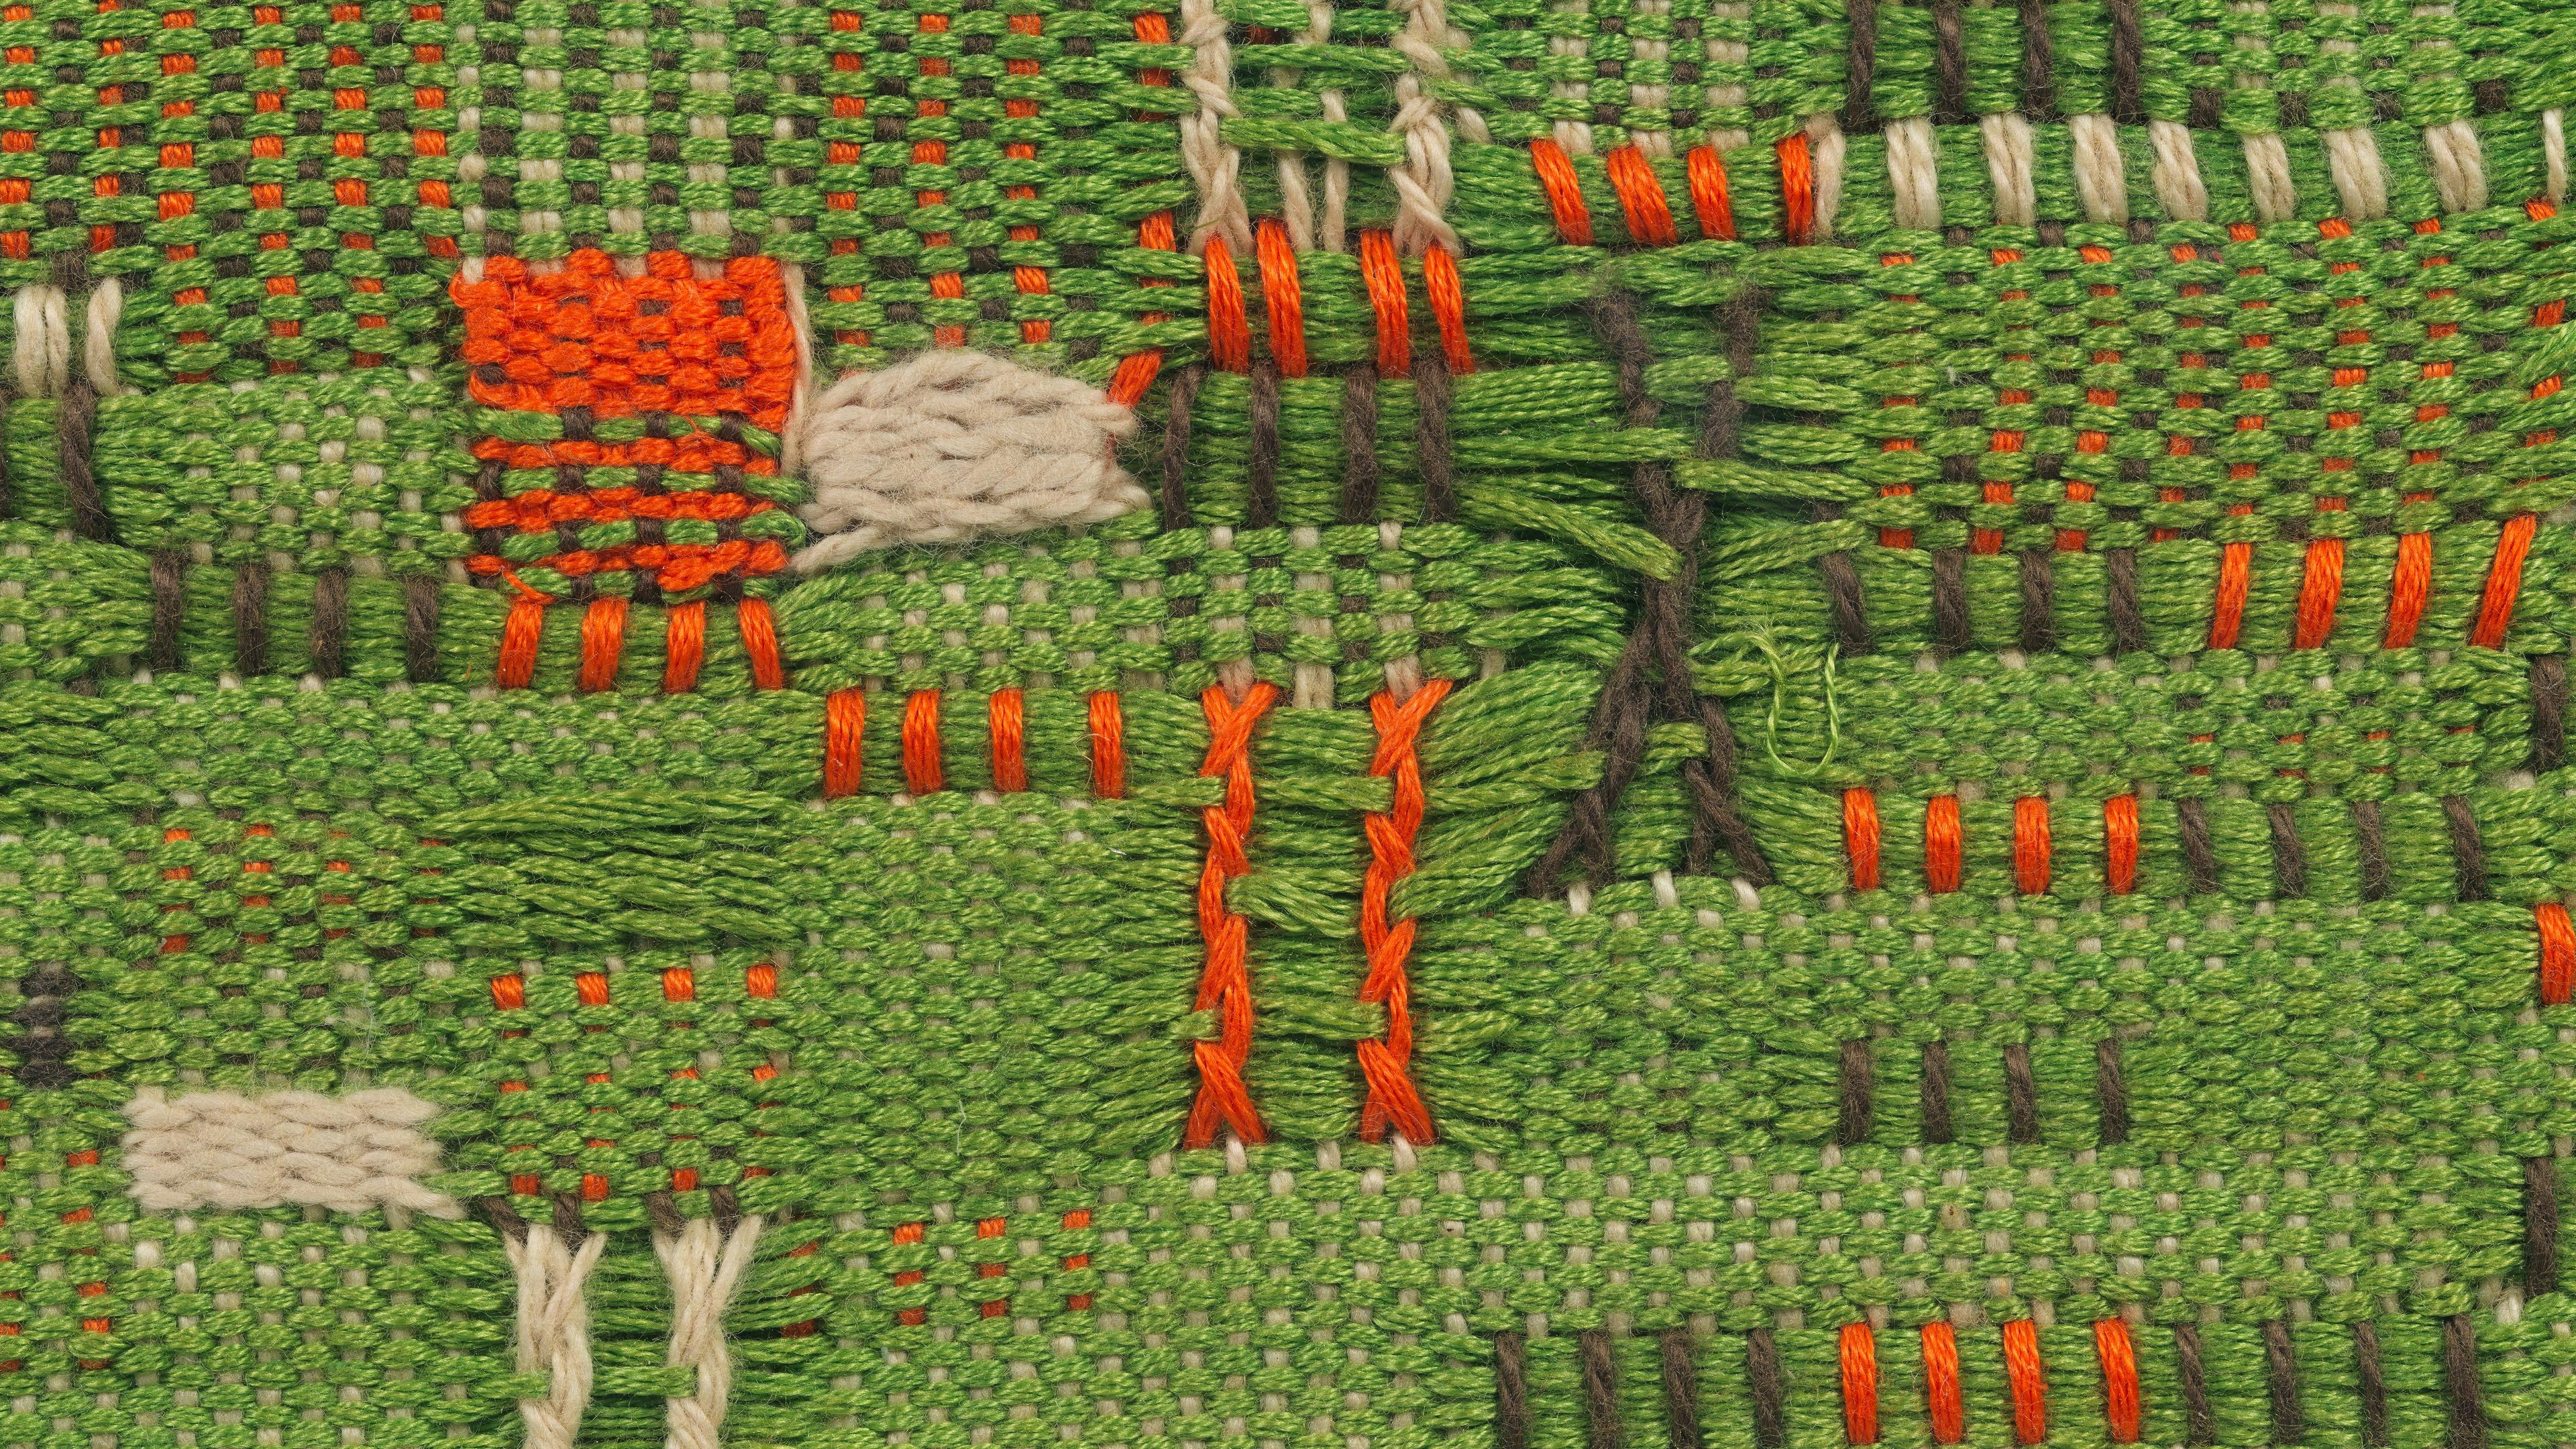 Weaving of mixed colors: green, orange, black, and white.